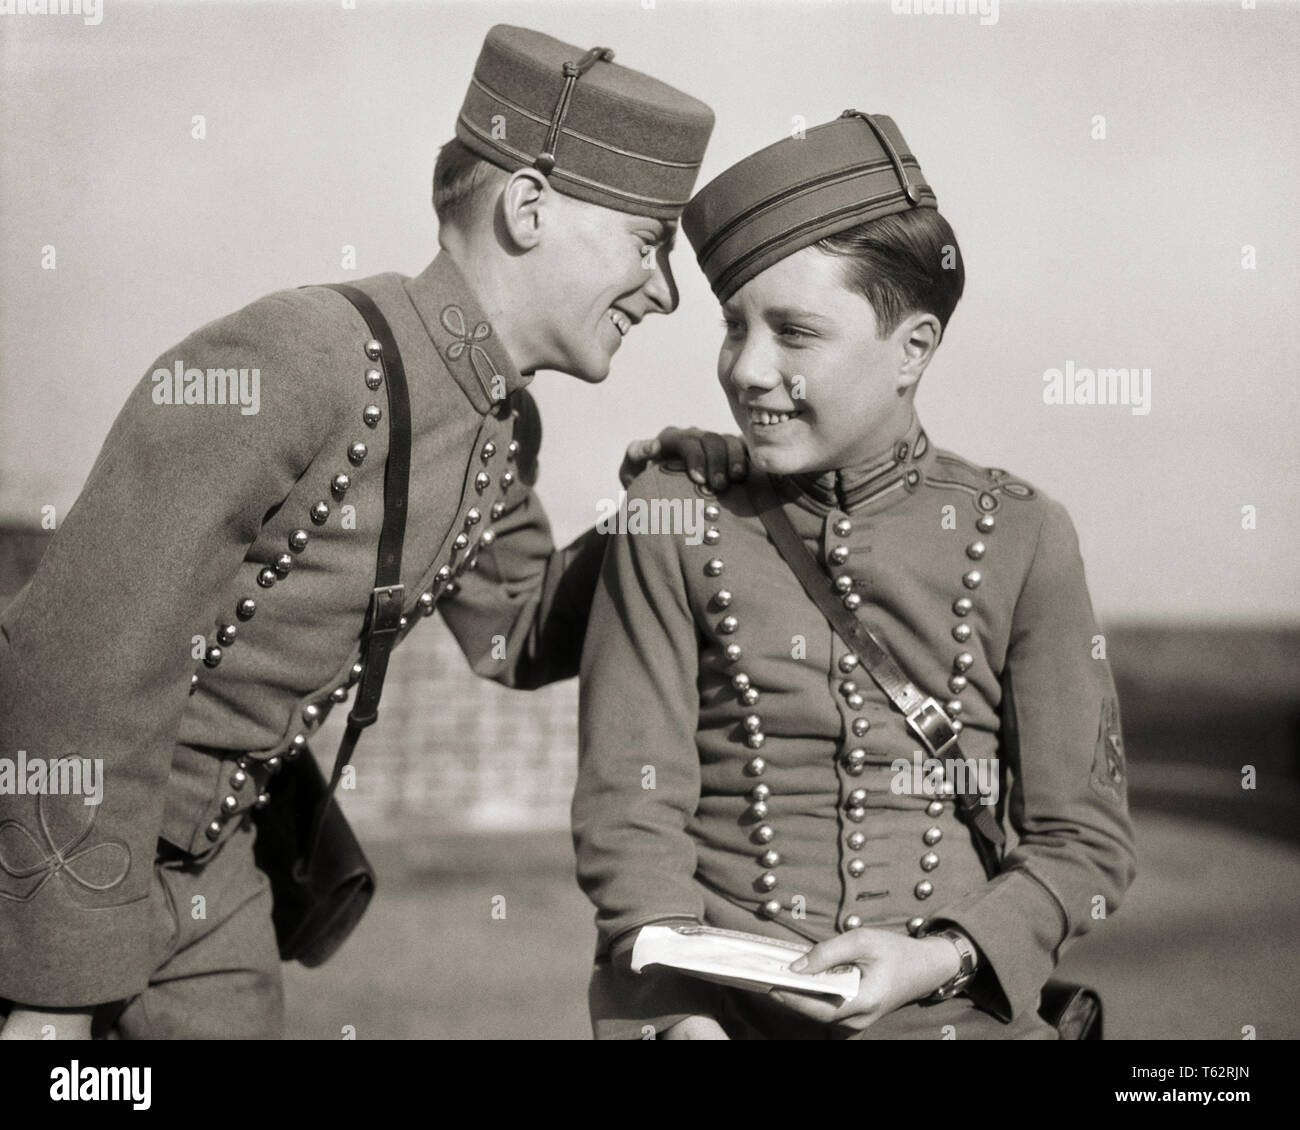 1920s 1930s TWO SMILING HOTEL BELLHOPS IN UNIFORM SHARING A SECRET - b3645 HAR001 HARS YOUNG ADULT TEAMWORK INFORMATION PLEASED JOY LIFESTYLE GOSSIP JOBS COPY SPACE FRIENDSHIP HALF-LENGTH PERSONS MALES TEENAGE BOY GOSSIPING B&W OCCUPATION HAPPINESS CHEERFUL KNOWLEDGE LABOR EMPLOYMENT OCCUPATIONS SMILES CONNECTION JOYFUL MESSENGER STYLISH TEENAGED BELLHOP EMPLOYEE COOPERATION JUVENILES PRE-TEEN PRE-TEEN BOY SECRETS TOGETHERNESS YOUNG ADULT MAN BLACK AND WHITE CAUCASIAN ETHNICITY HAR001 LABORING OLD FASHIONED Stock Photo